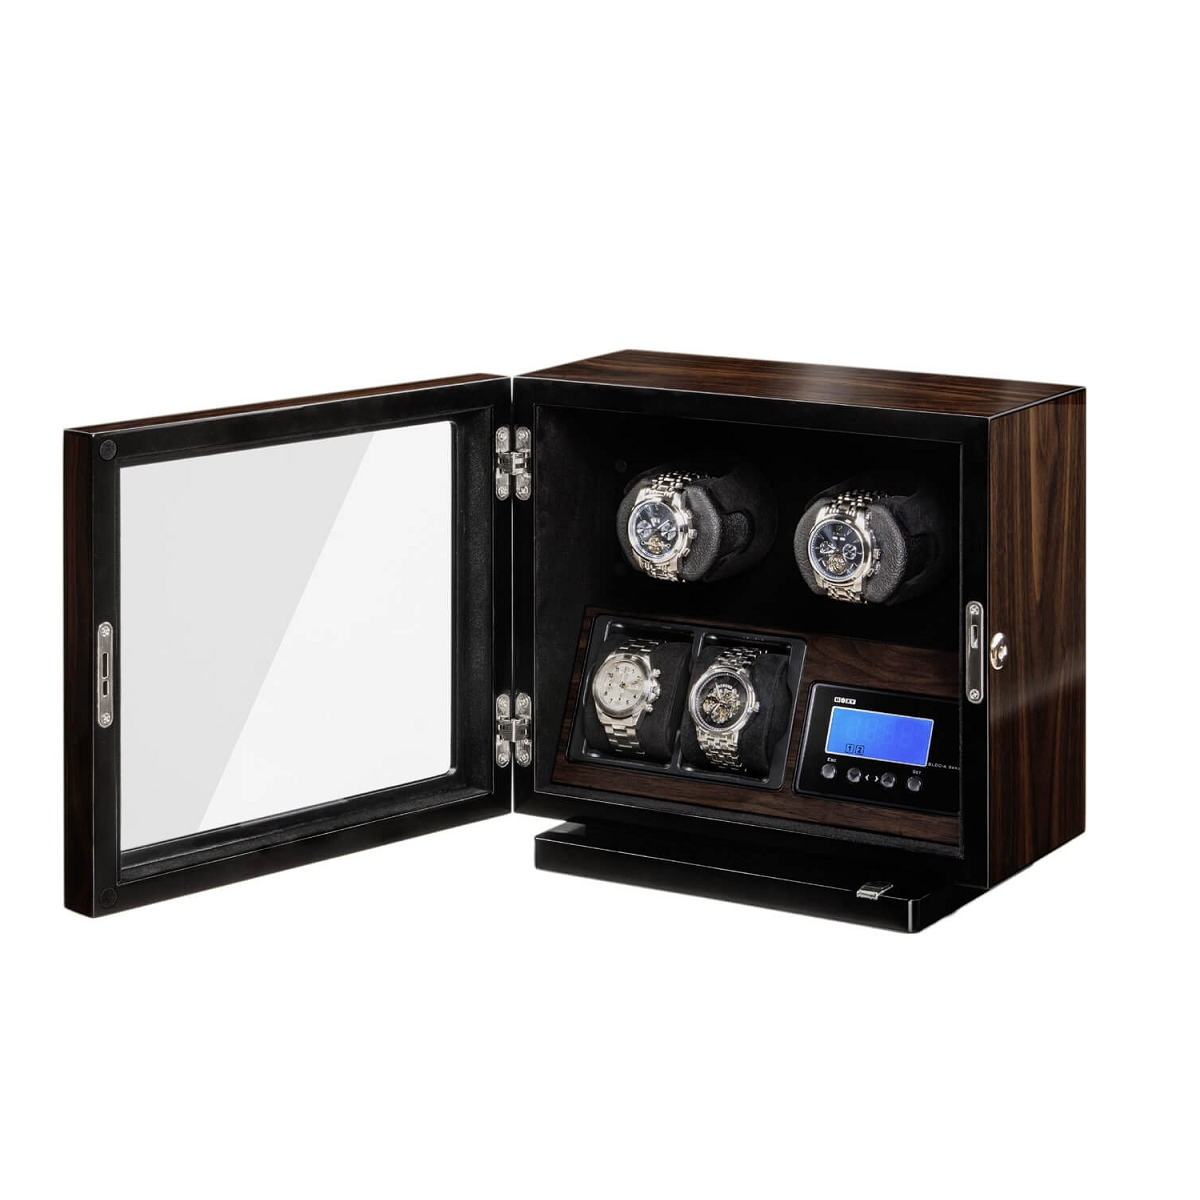 Beco® WATCH WINDER BLDC WALNUT FOR 2+2 WATCHES